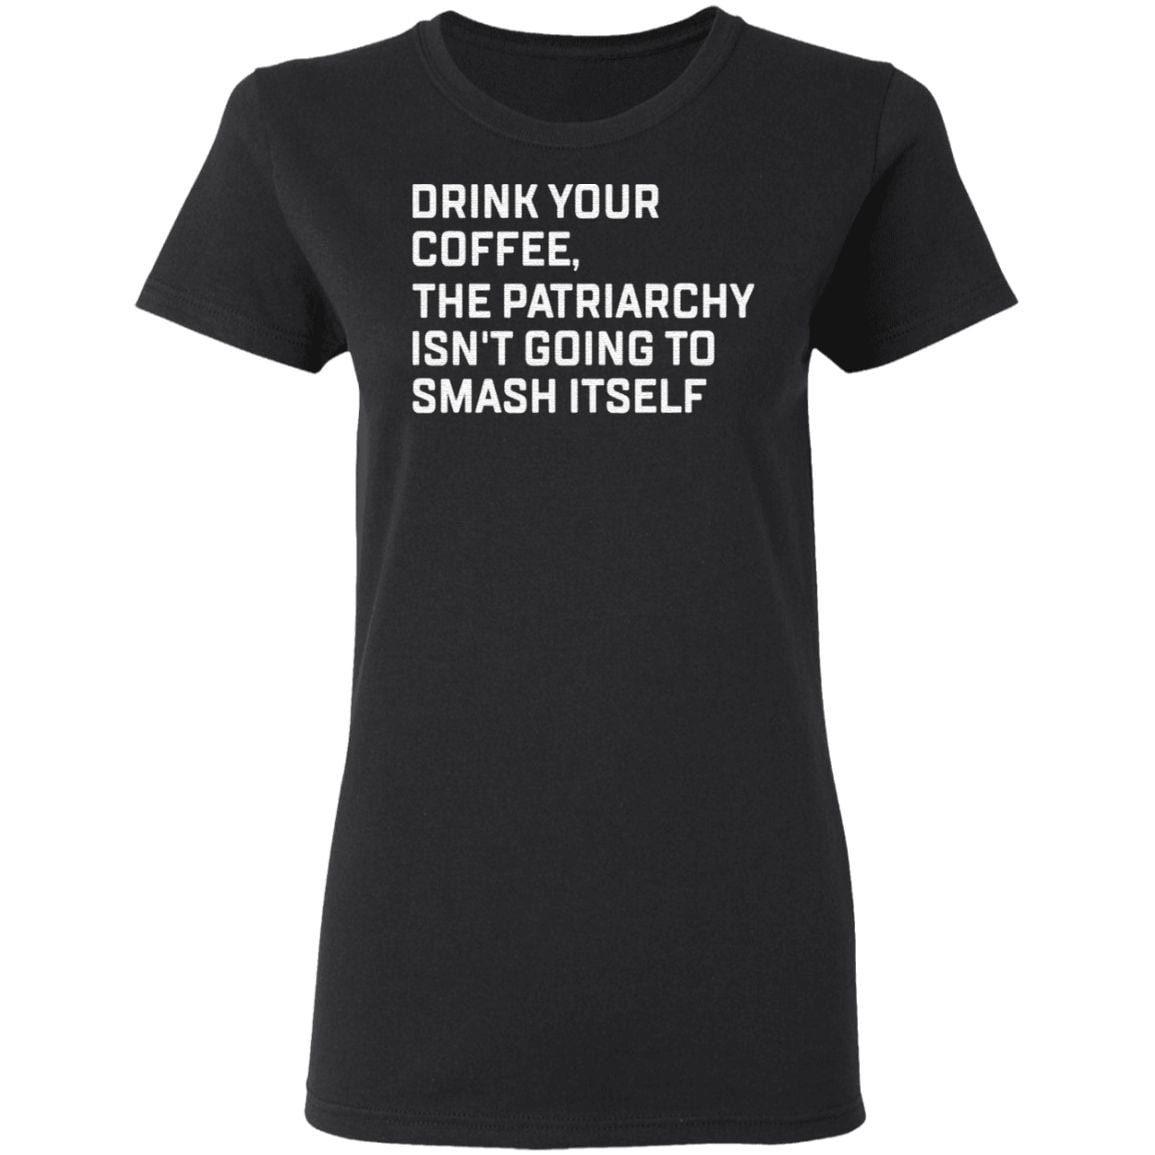 Drink your coffee the patriarchy isn’t going to smash itself t shirt